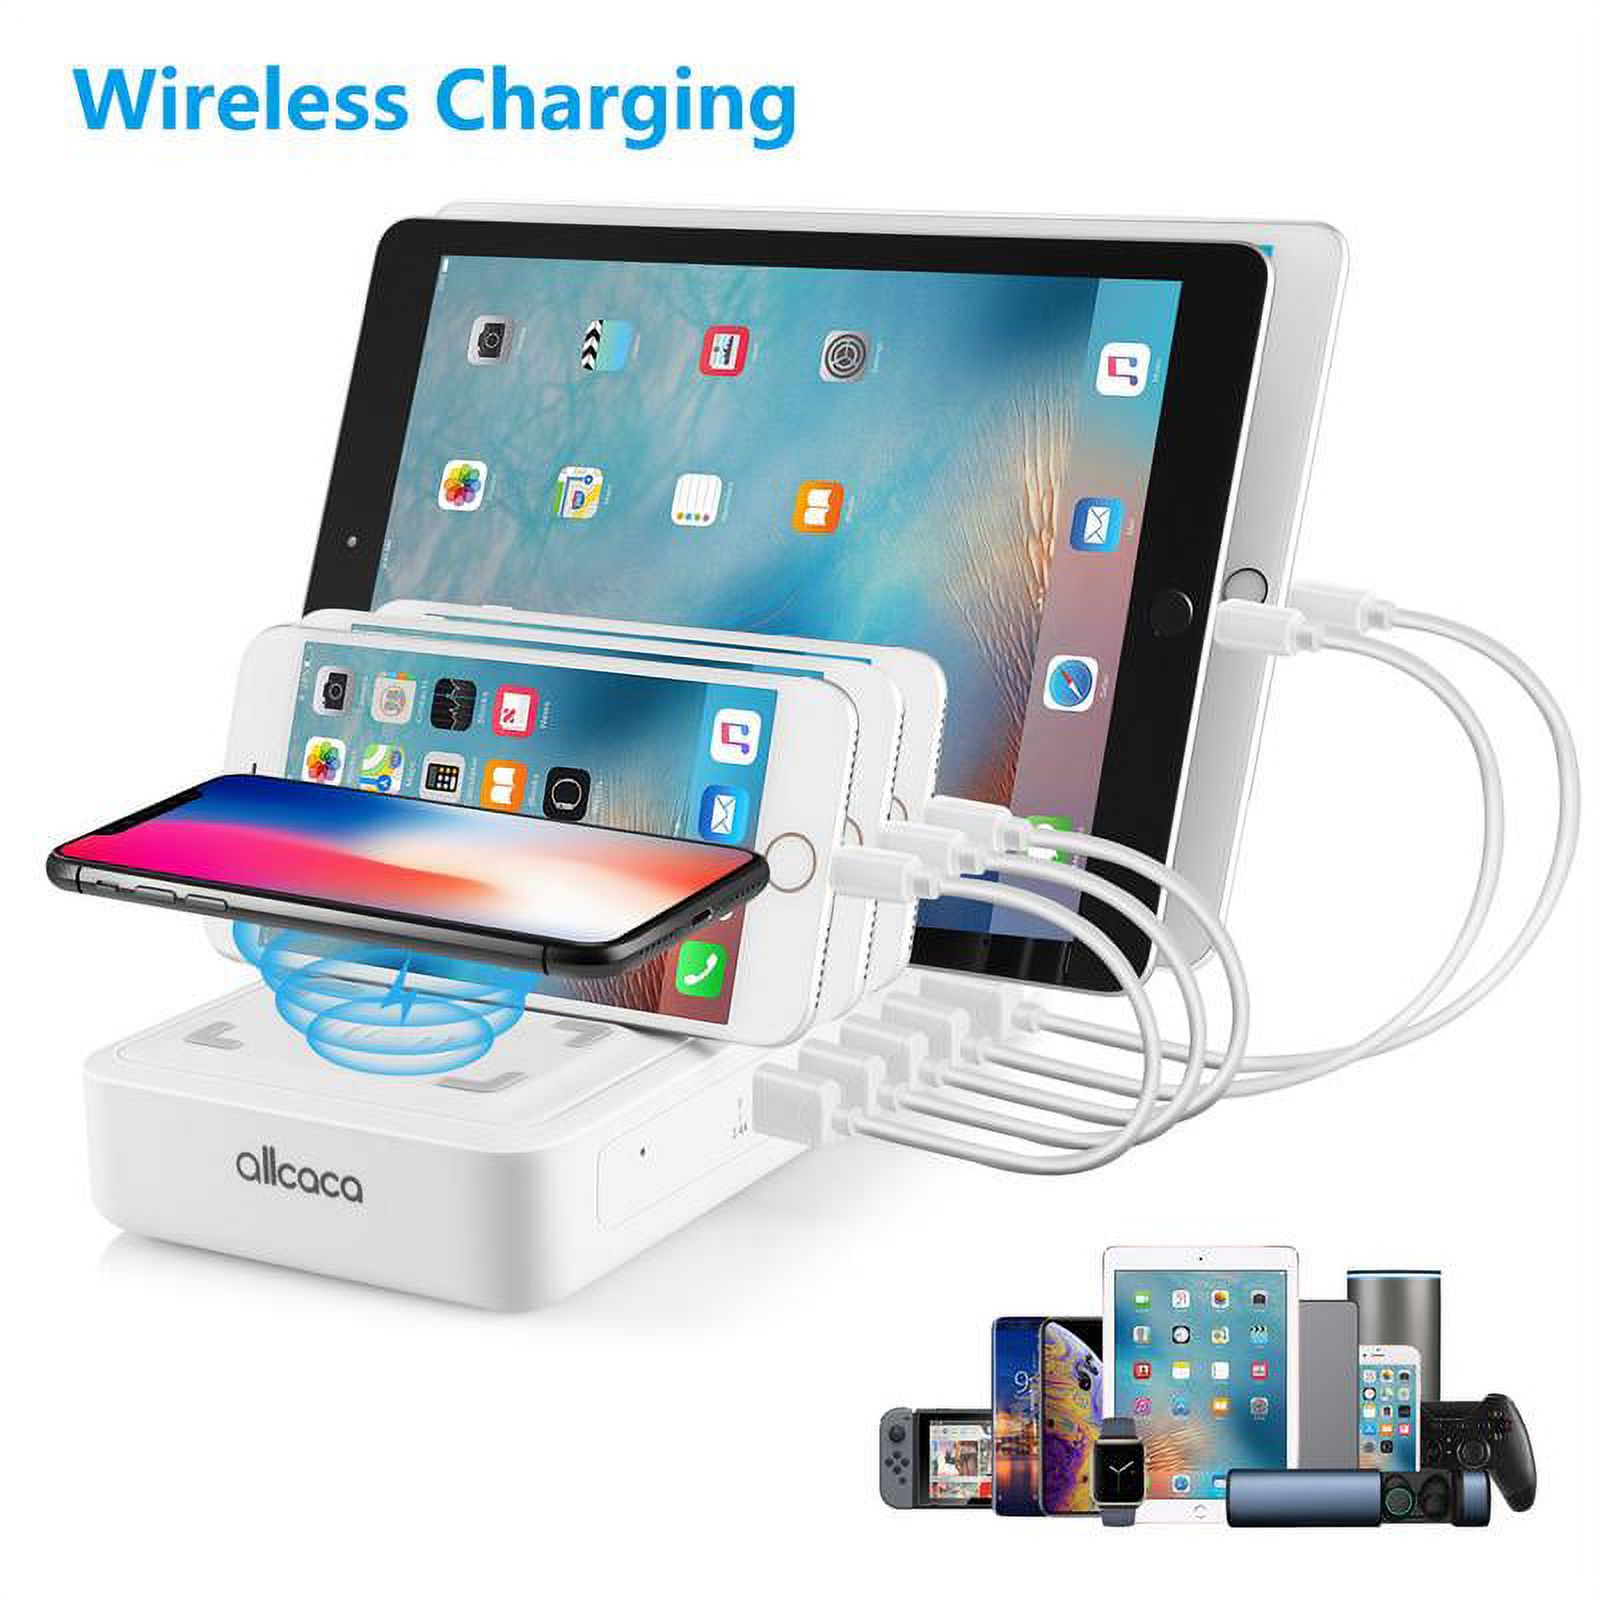 Wireless Charging Charging Station Dock & Organizer 5-Port USB Charging Station Dock Desktop with 1 Wireless Charging Pad 40W for Smartphones, Tablets & Other Gadgets - White - image 1 of 10